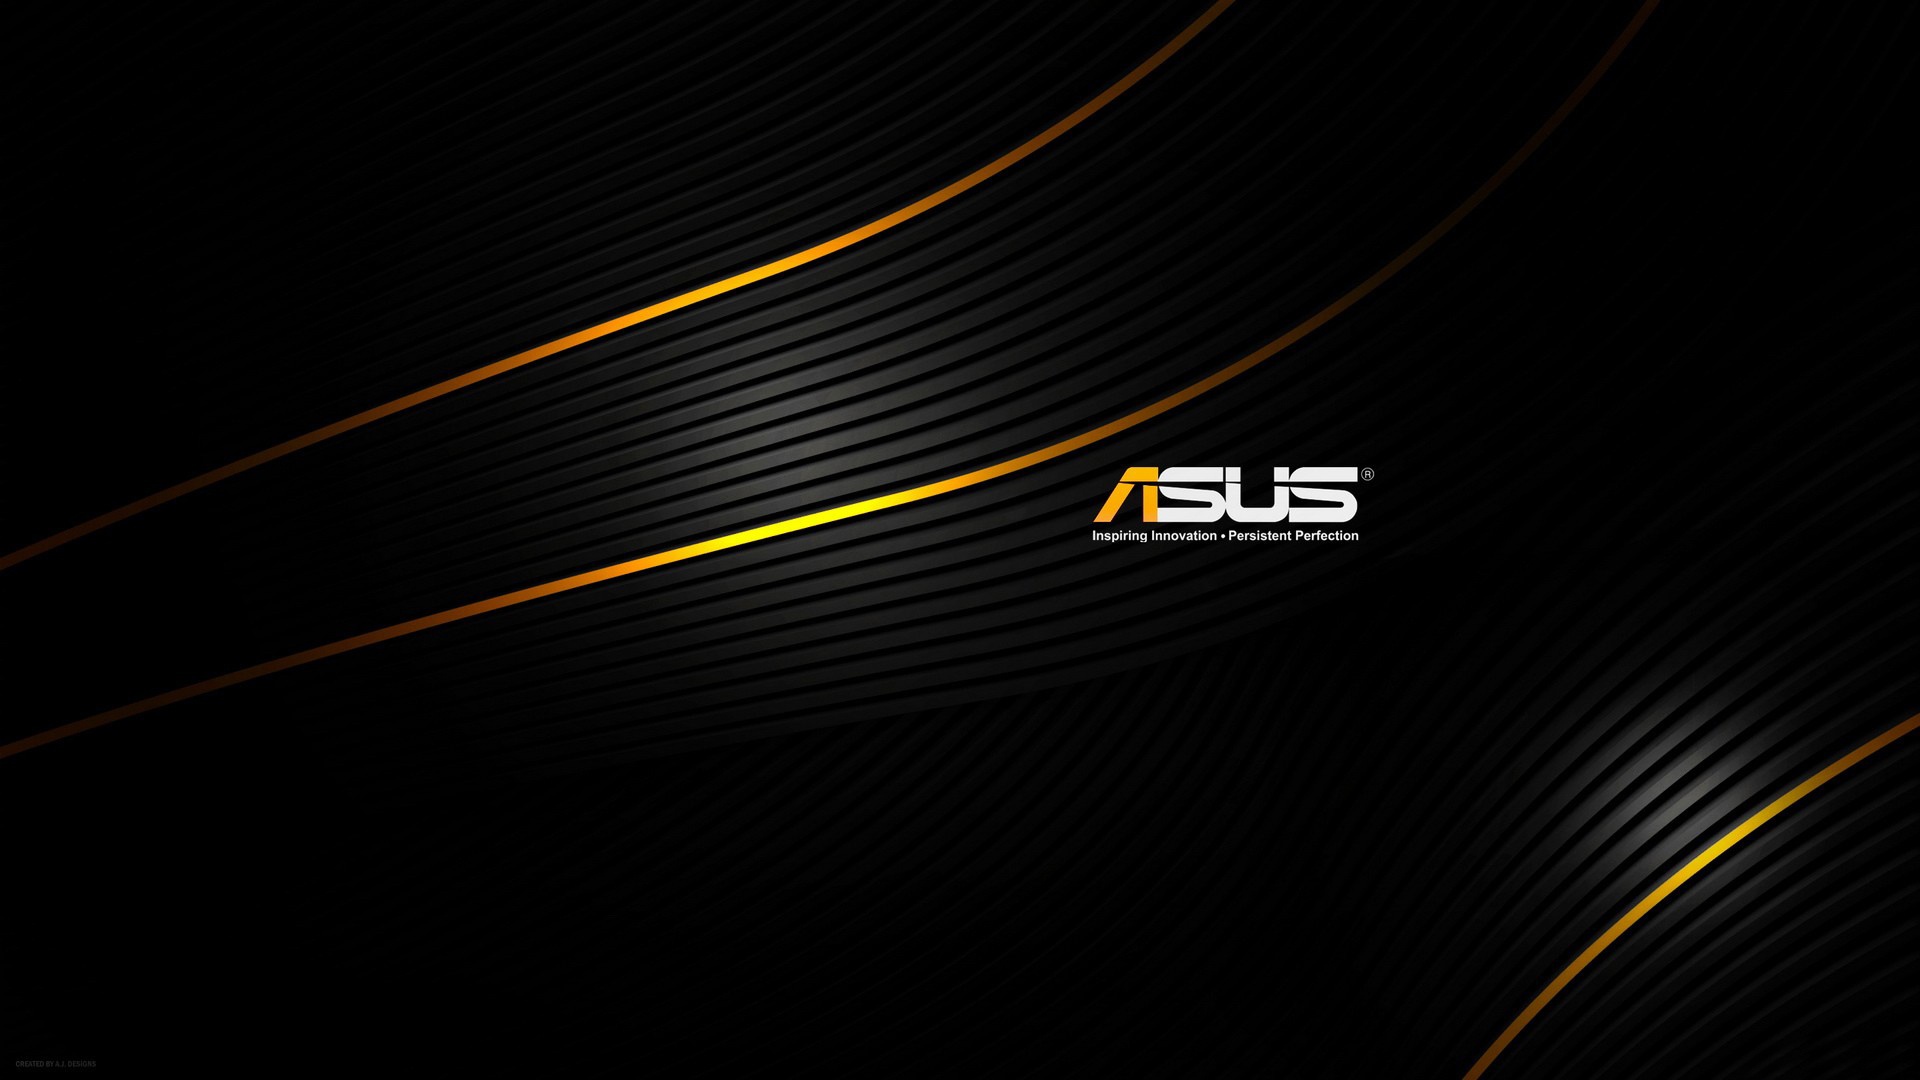 Asus Black Background Wallpapers   1920x1080   250550 1920x1080